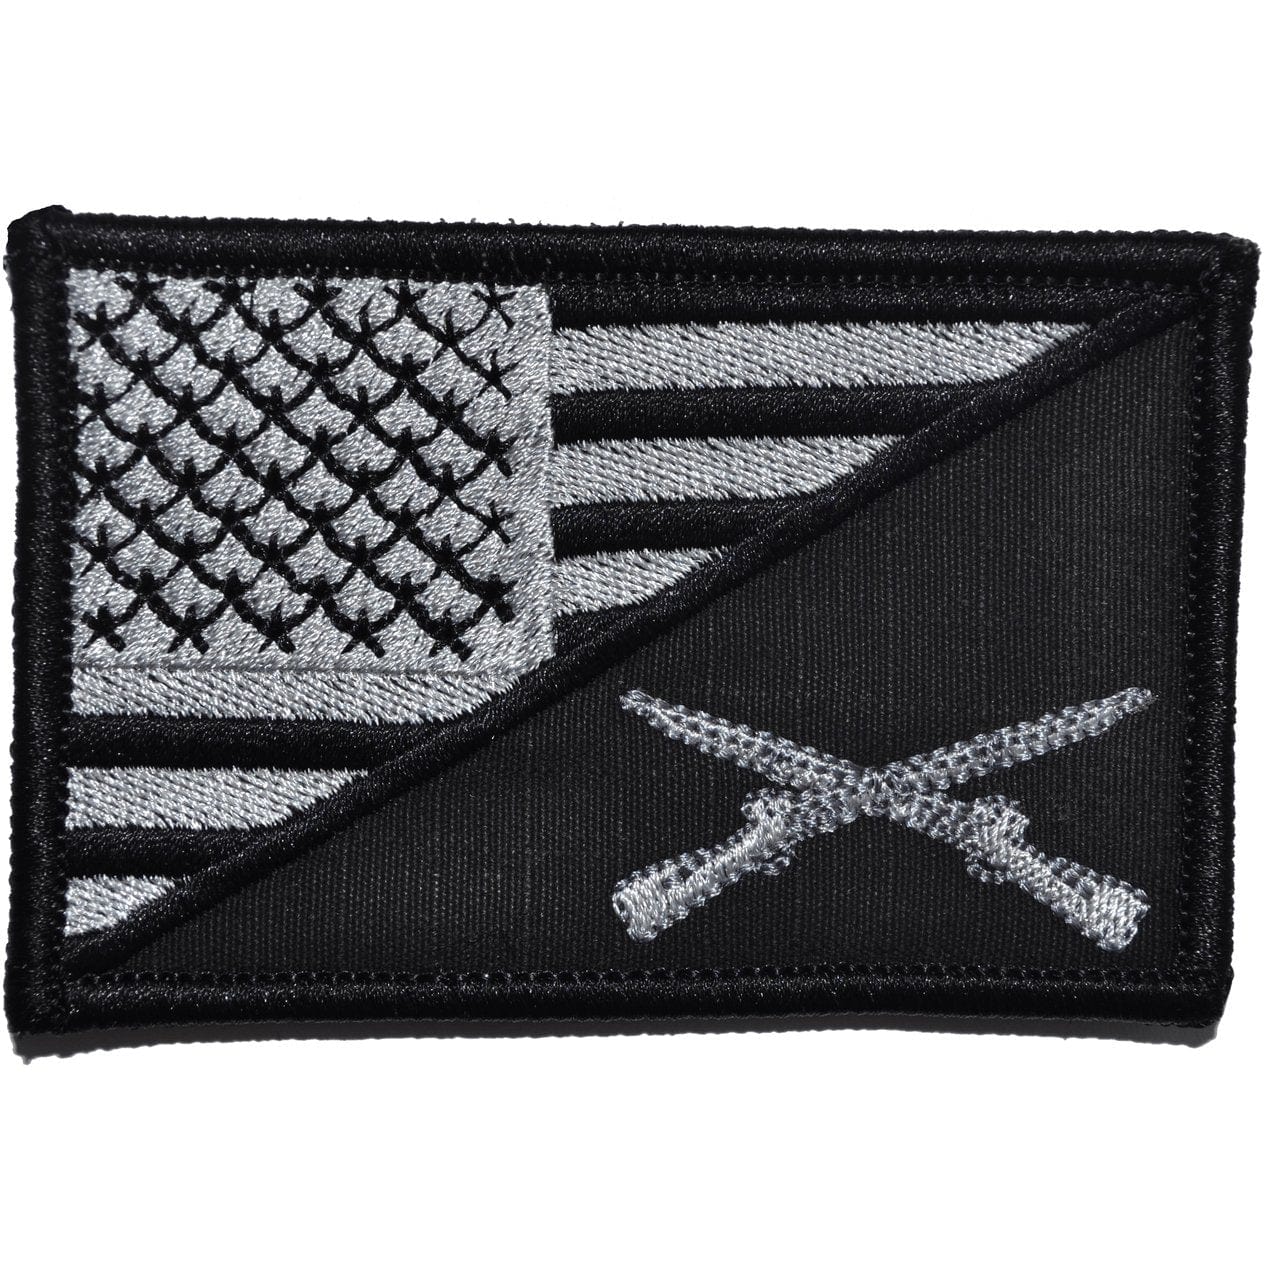 Tactical Gear Junkie Patches Black Rifle Cross Infantry USA Flag - 2.25x3.5 Patch